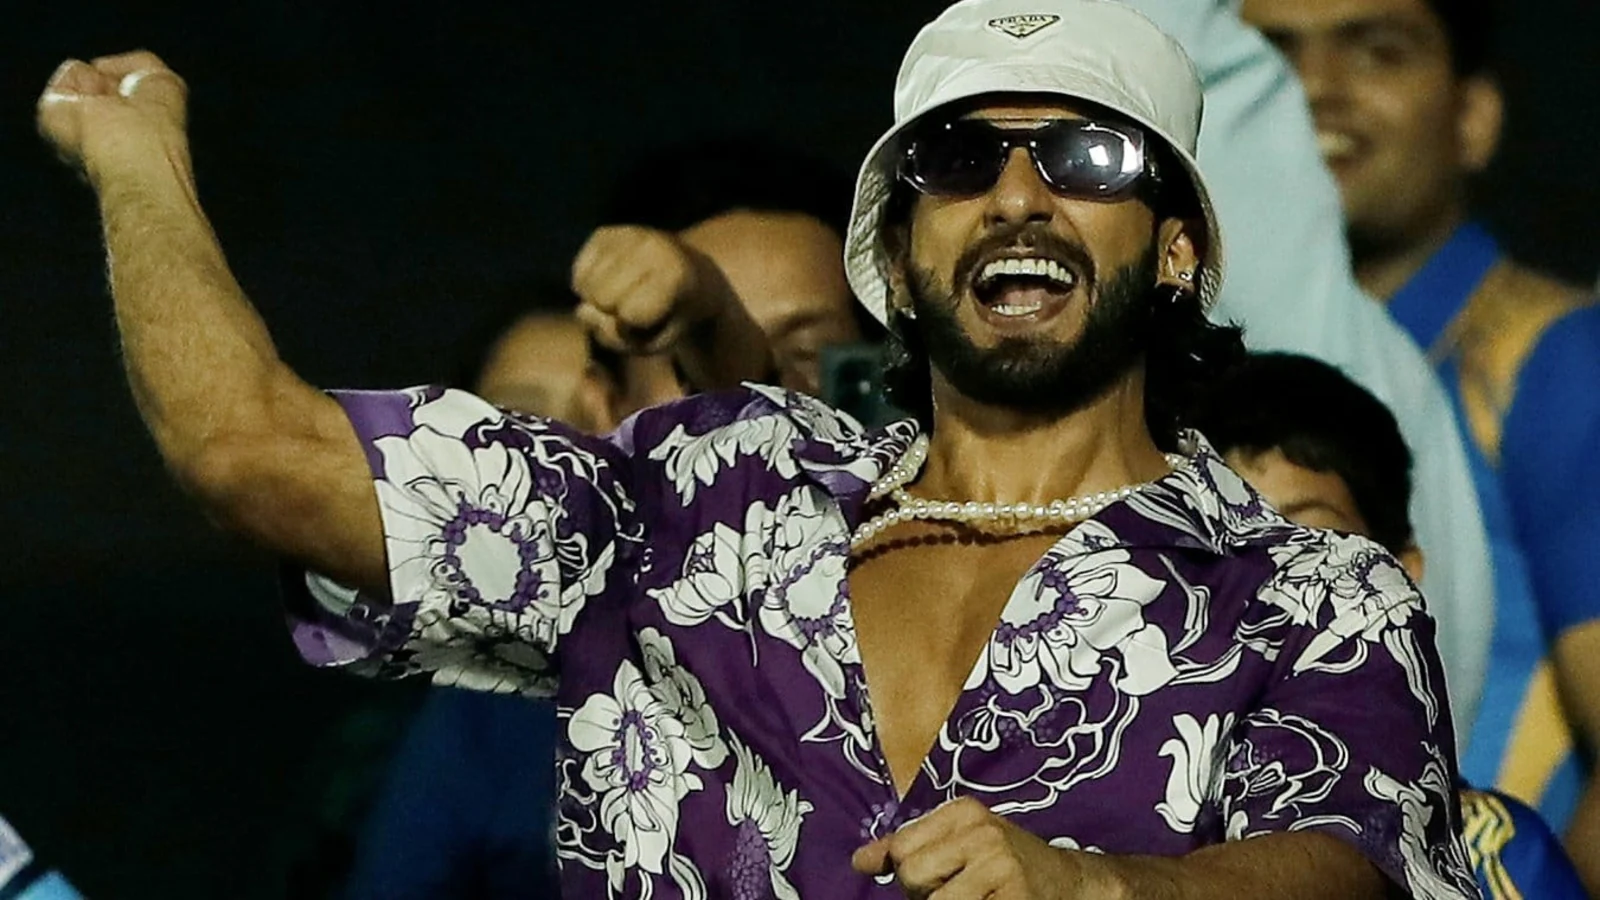 Ranveer Singh jumps with joy, punches the air in response to Rohit Sharma’s six at IPL match in Mumbai. Watch